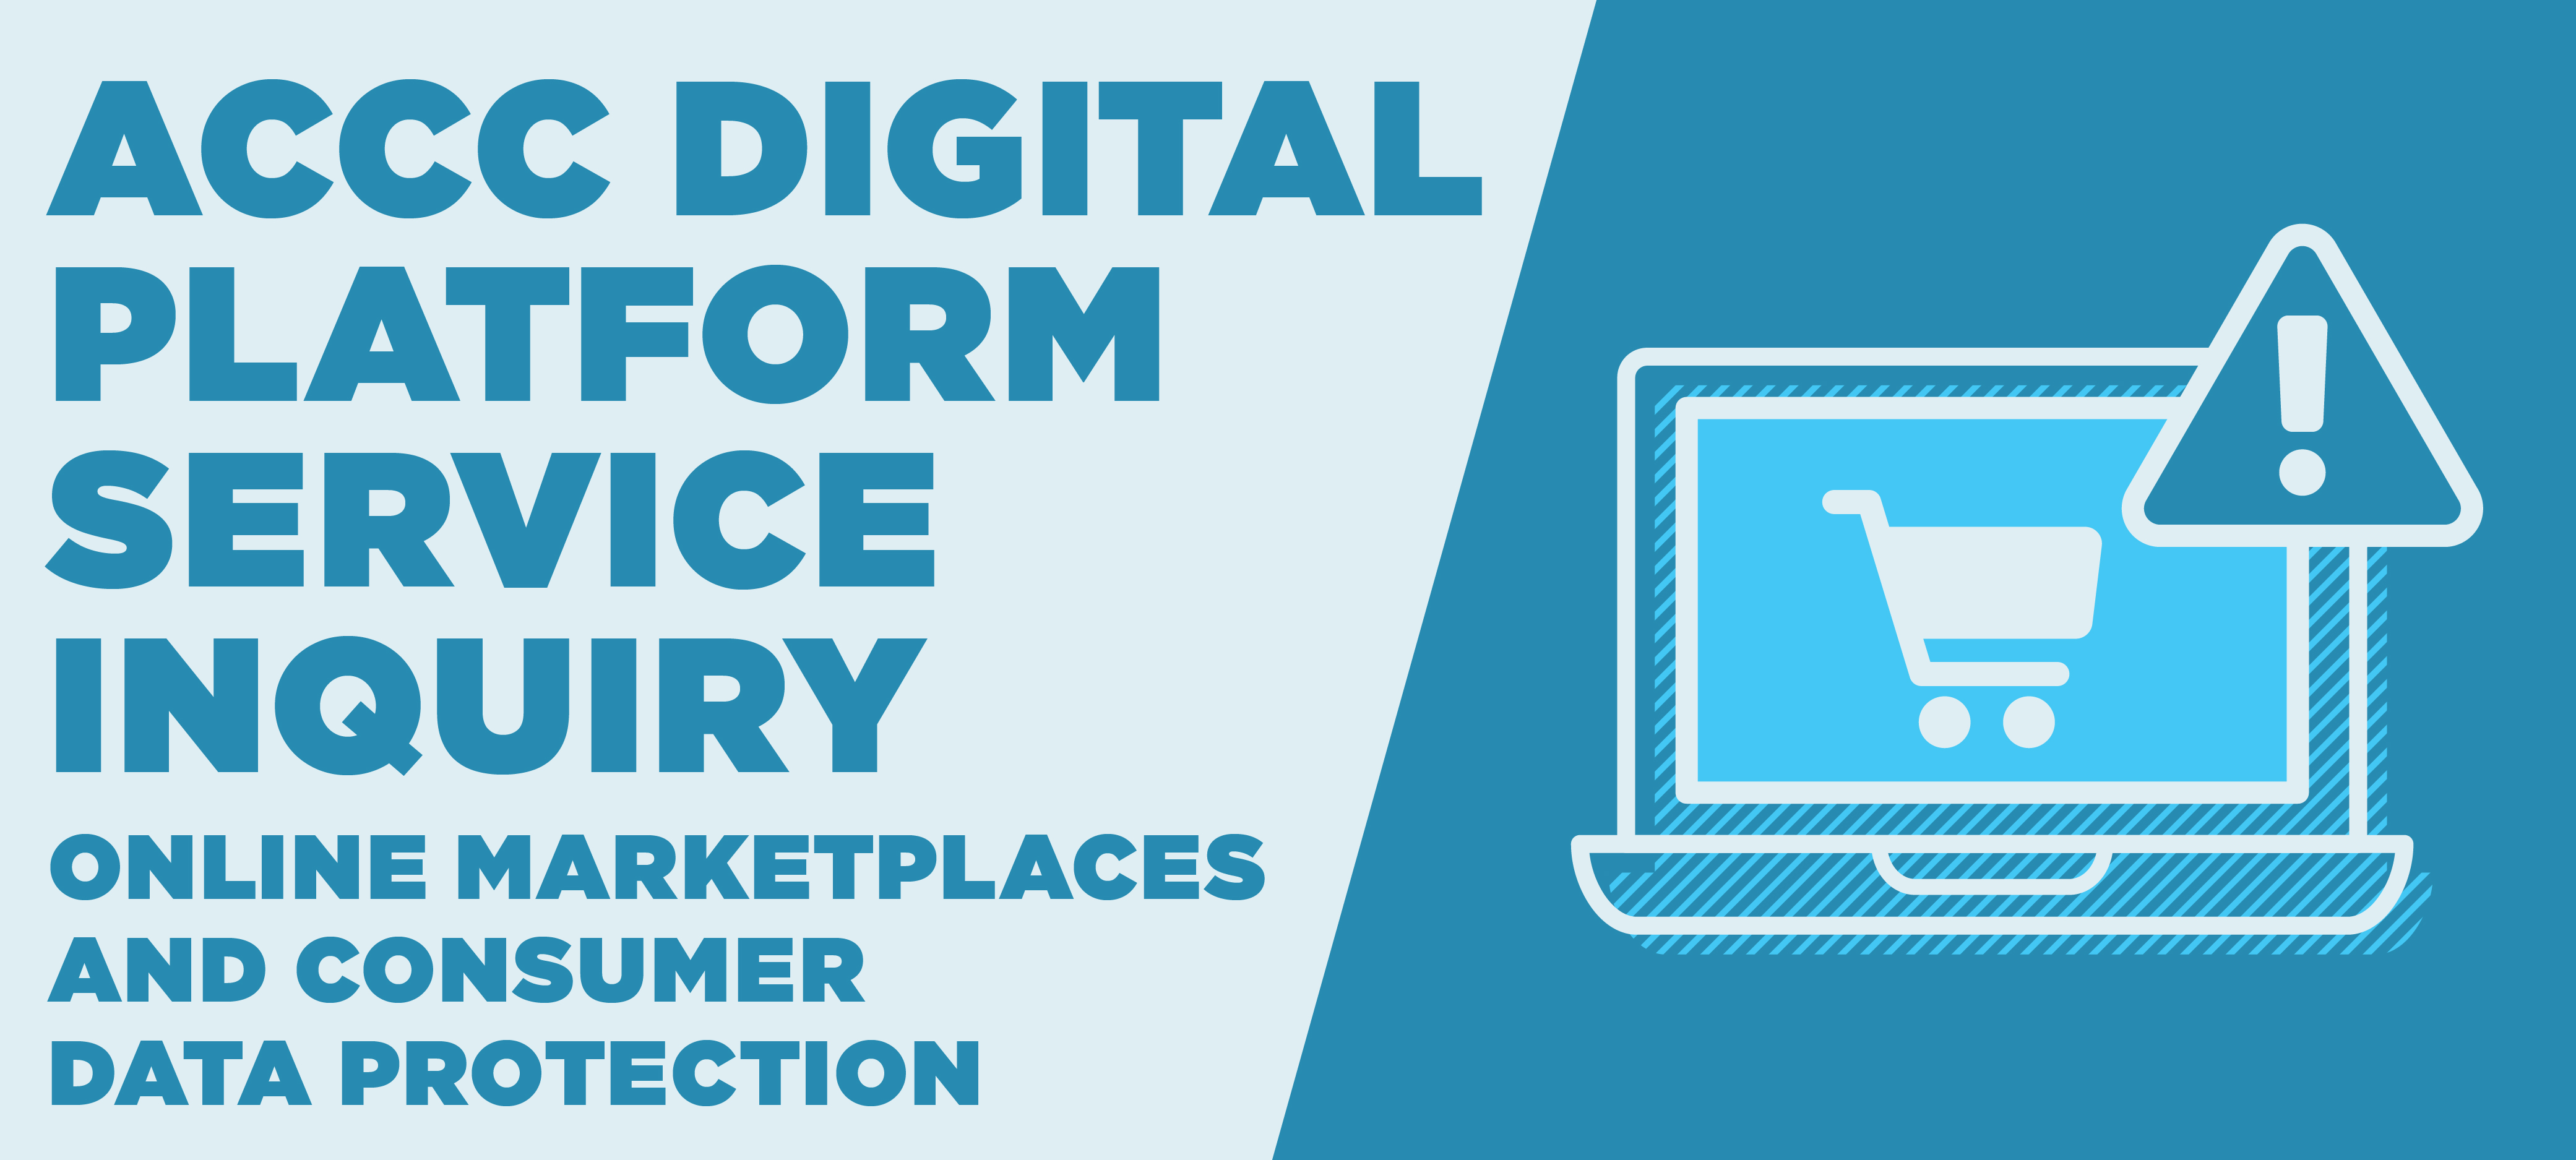 ACCC Digital Platform Service Inquiry: Online Marketplaces and Consumer Data Protection 